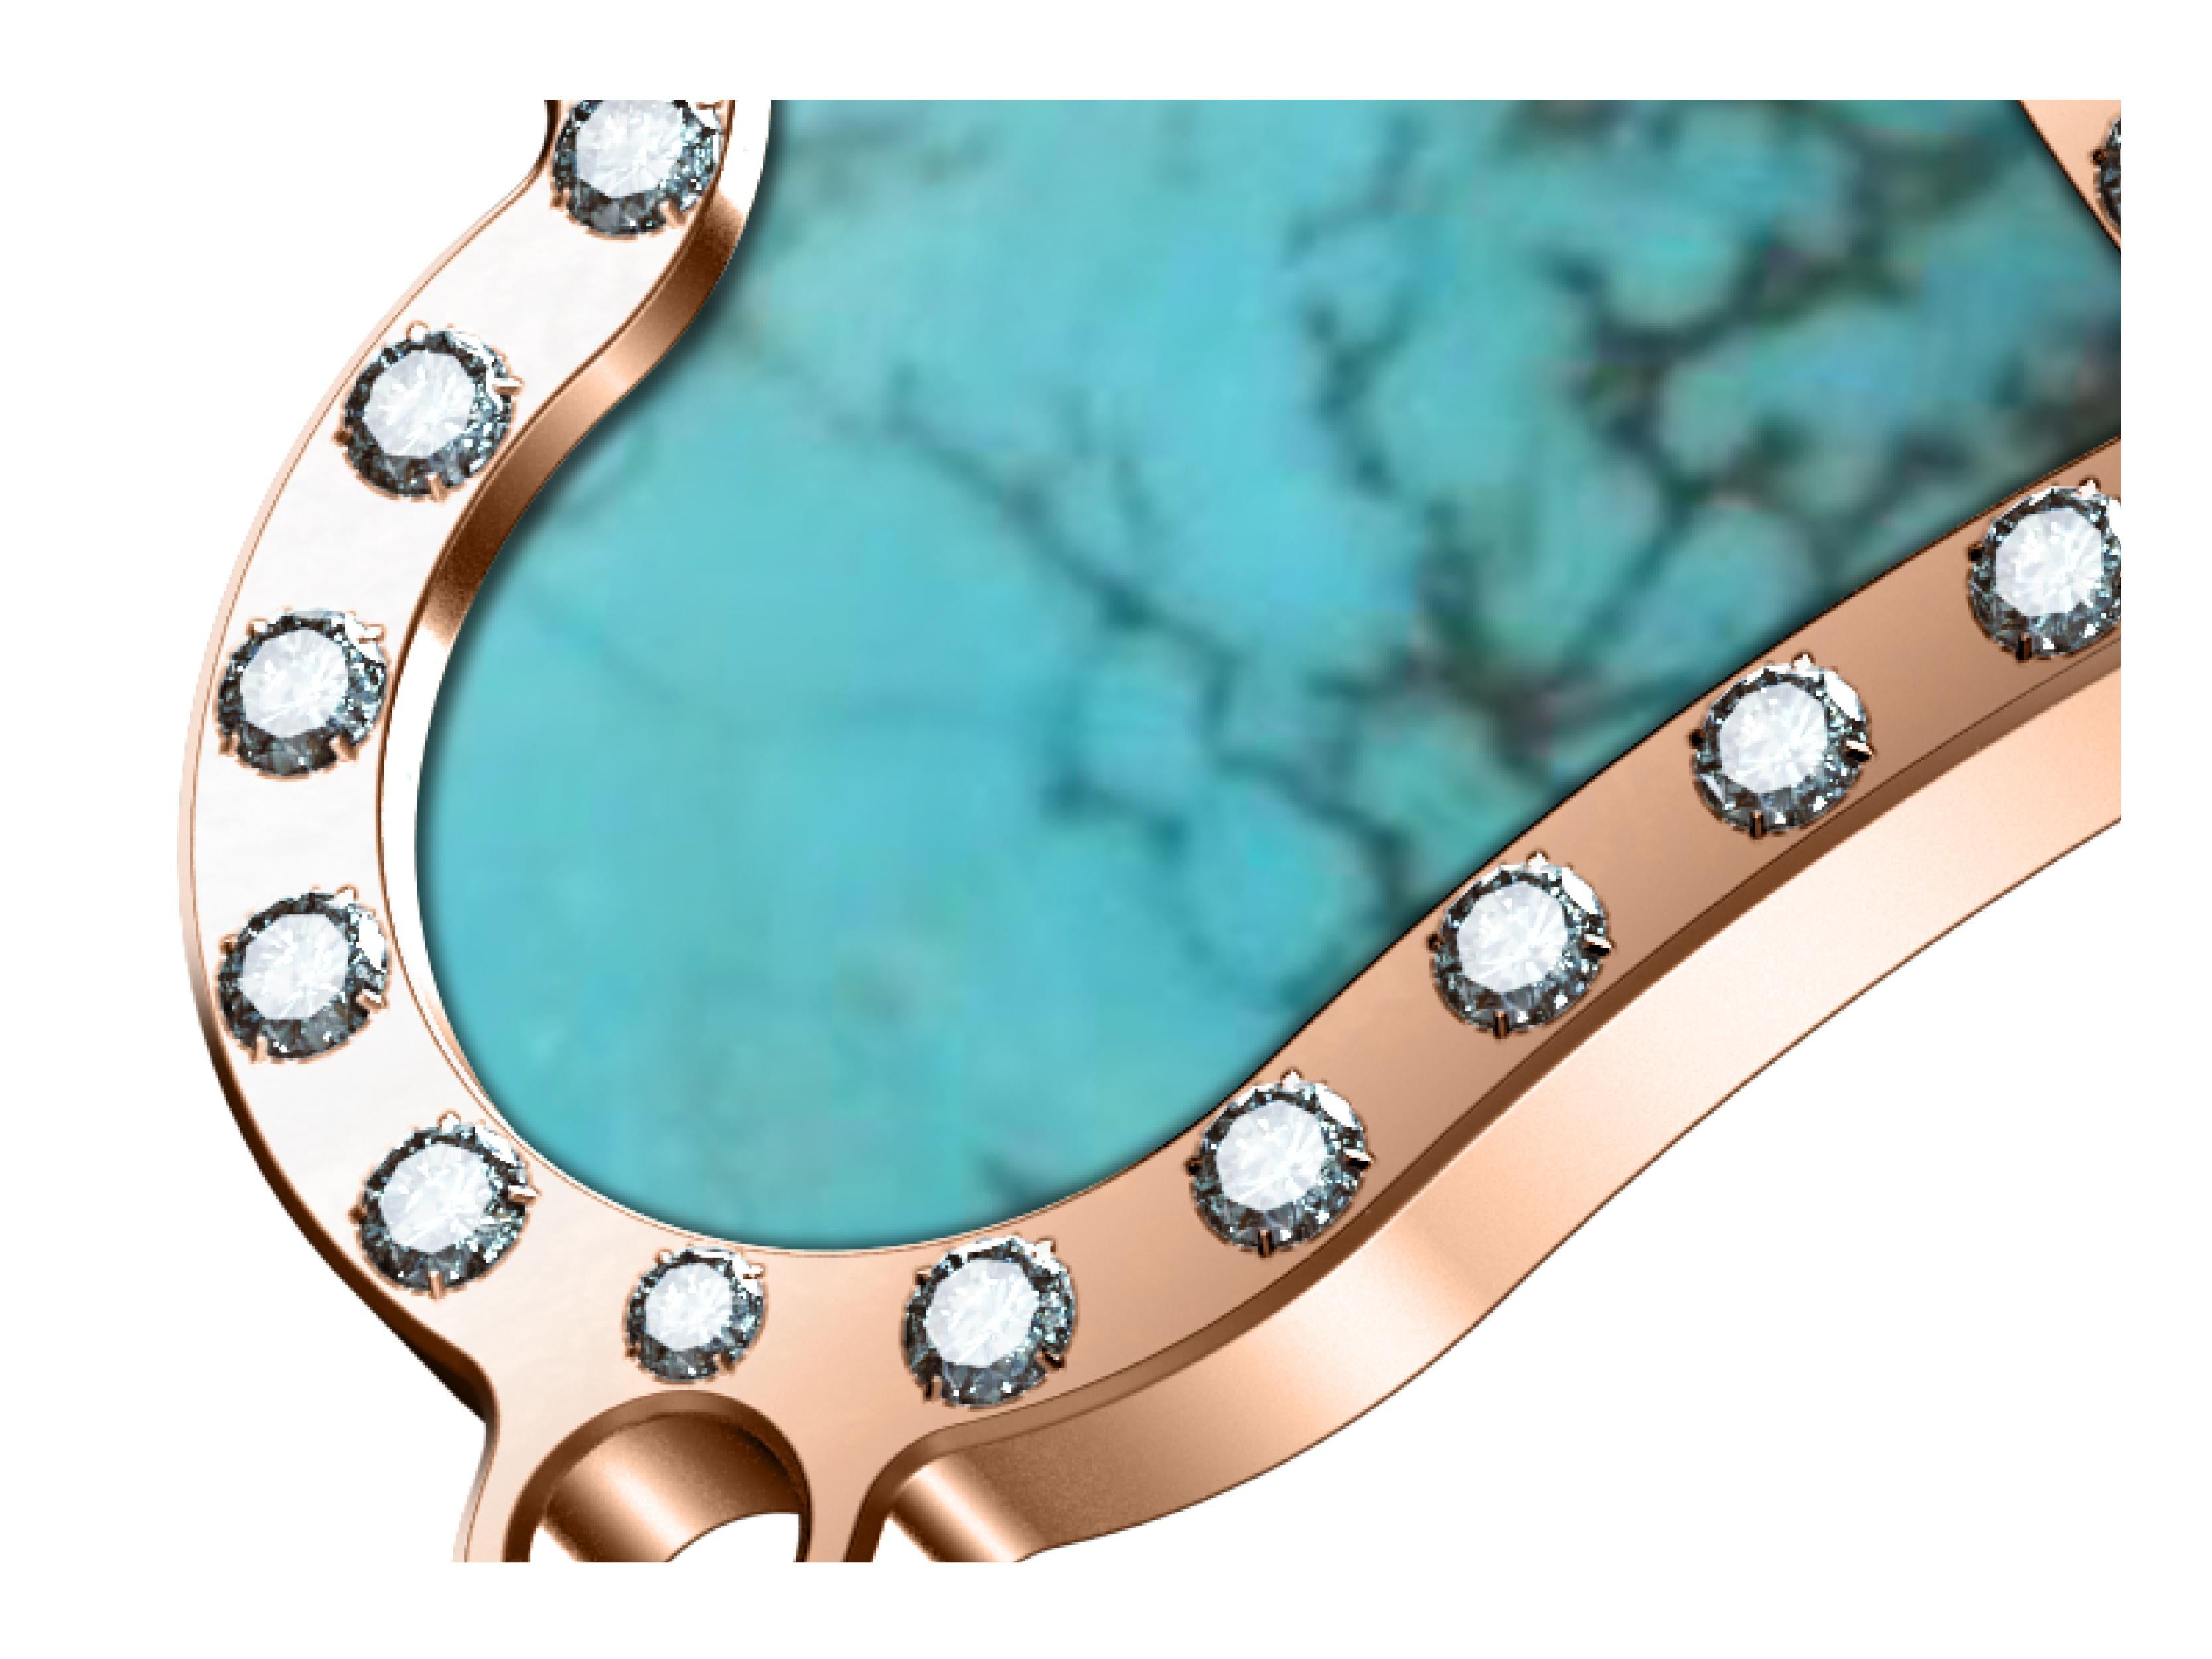 B.R.M Luxury Cœur bracelet 18K rose gold, diamonds and  turquoise blue stone for woman.
The heart-shape bracelet with precious curves is expression of unalterable love. Rose gold
18K, diamonds, decorative stones, with infinity forçat chain attached